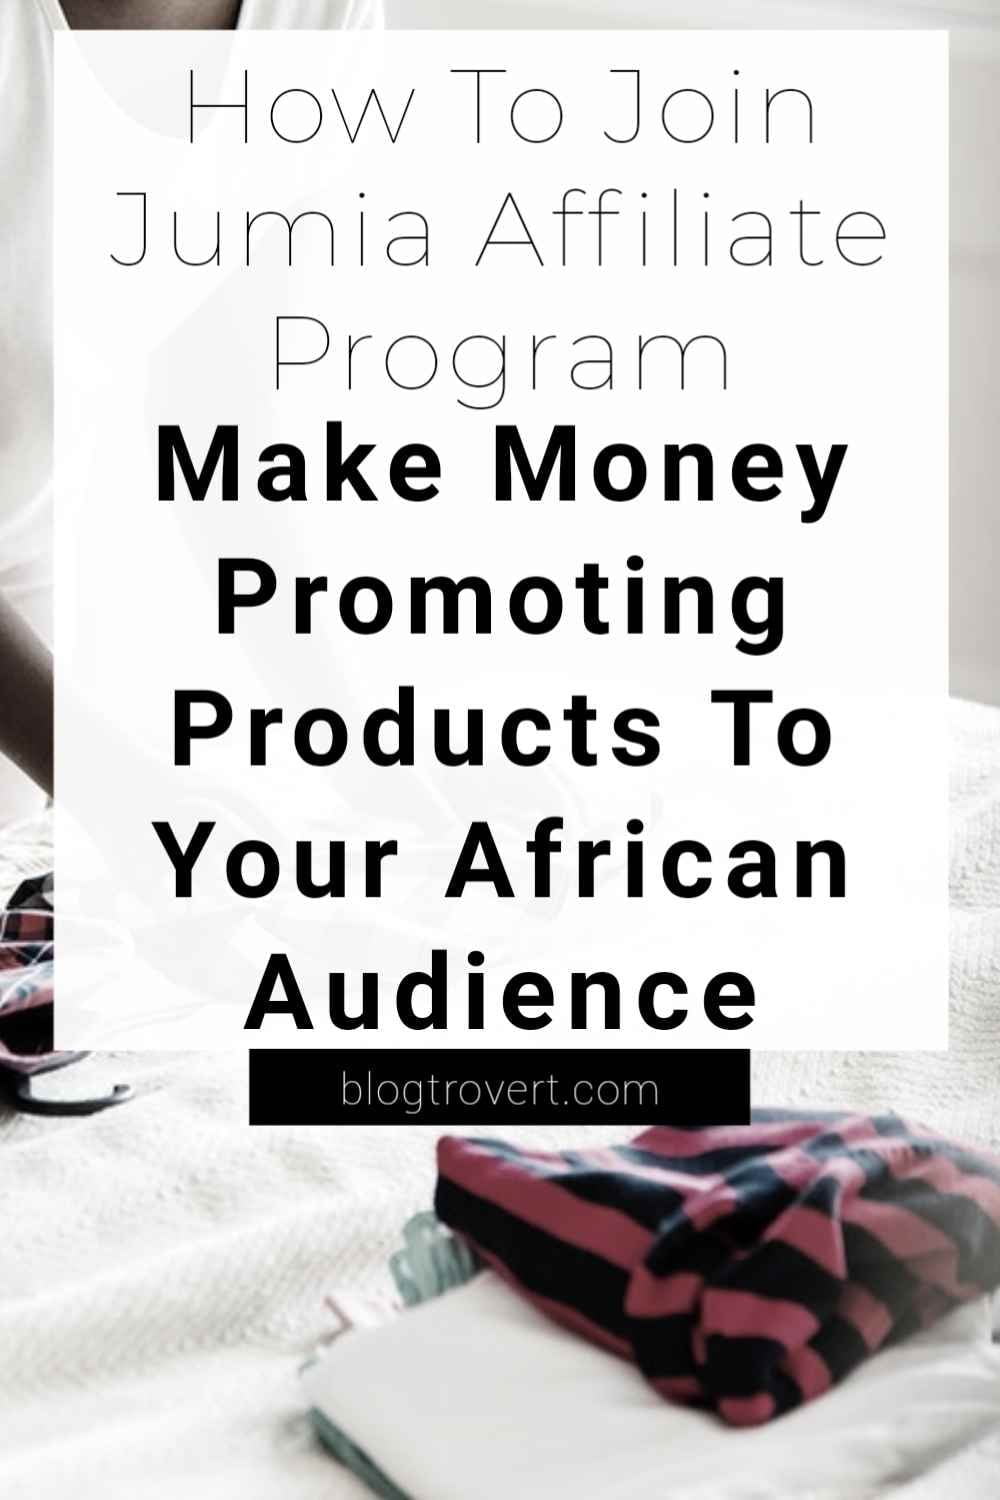 How To Join The Jumia Affiliate Program And Get Paid To Promote Products 4